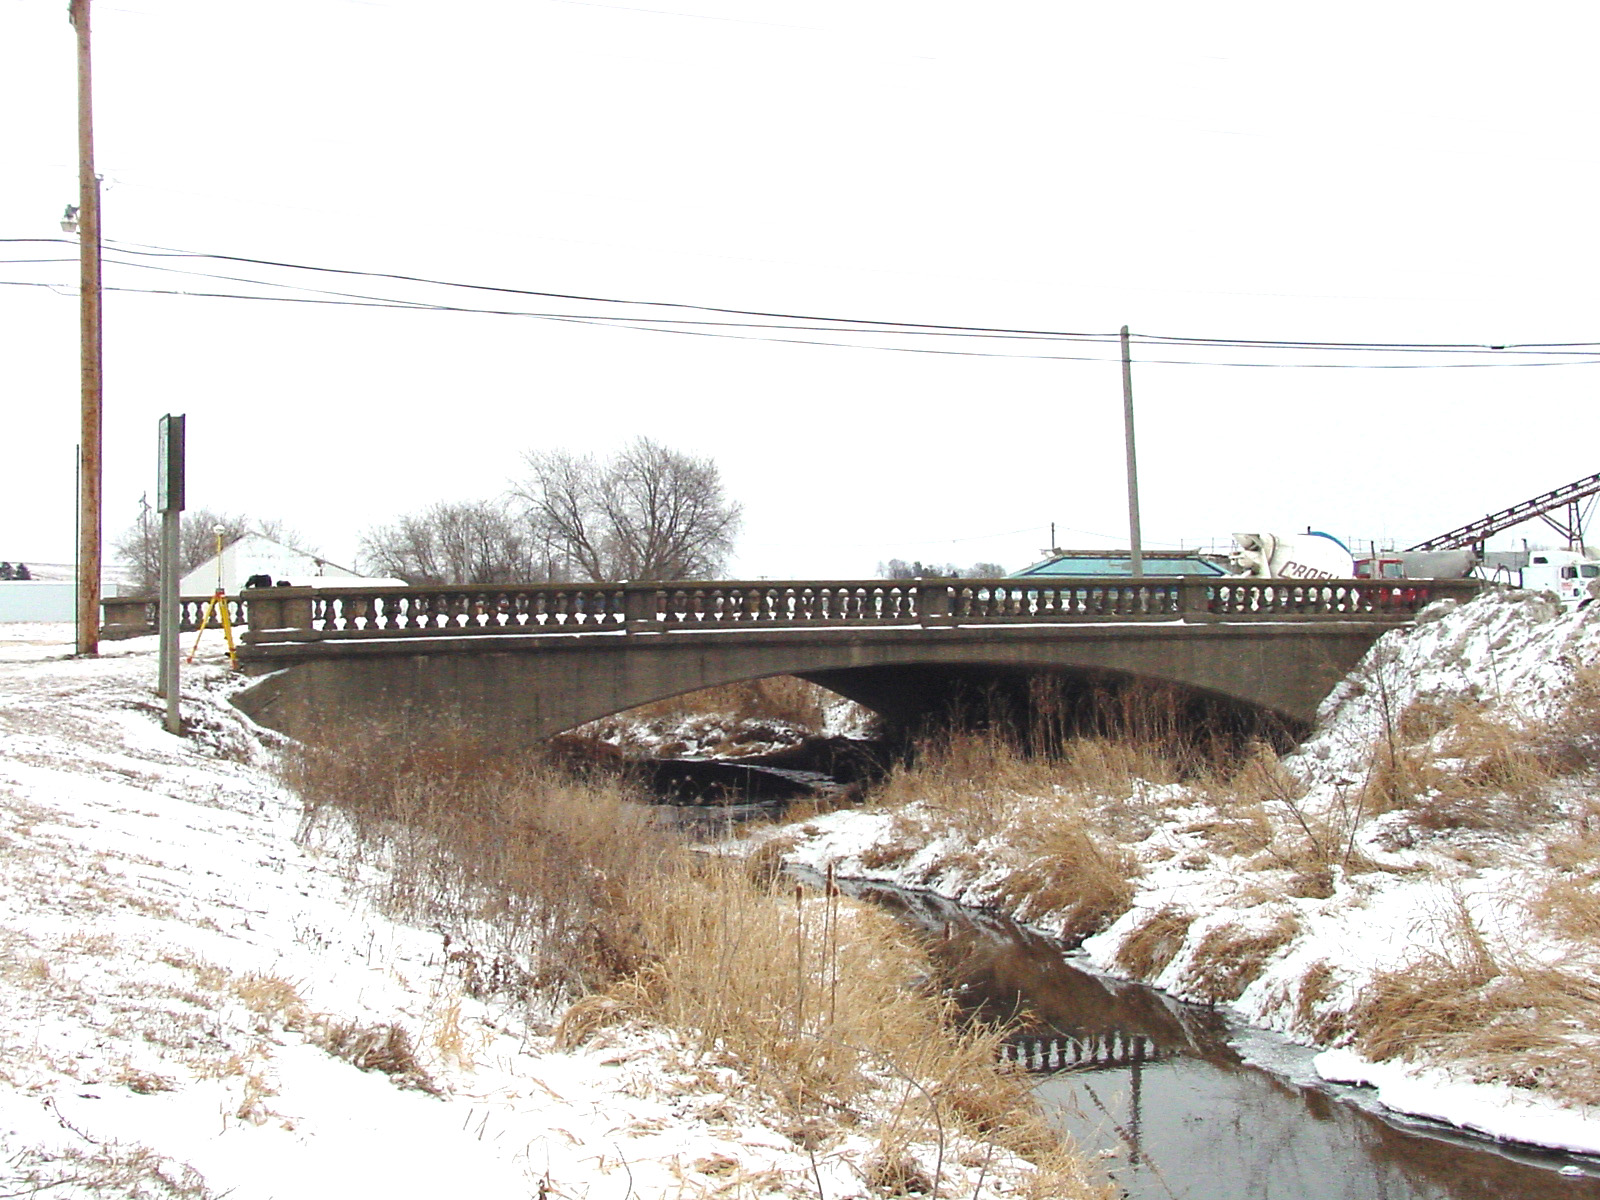 Old historic bridge in the winter over a shallow creek bed